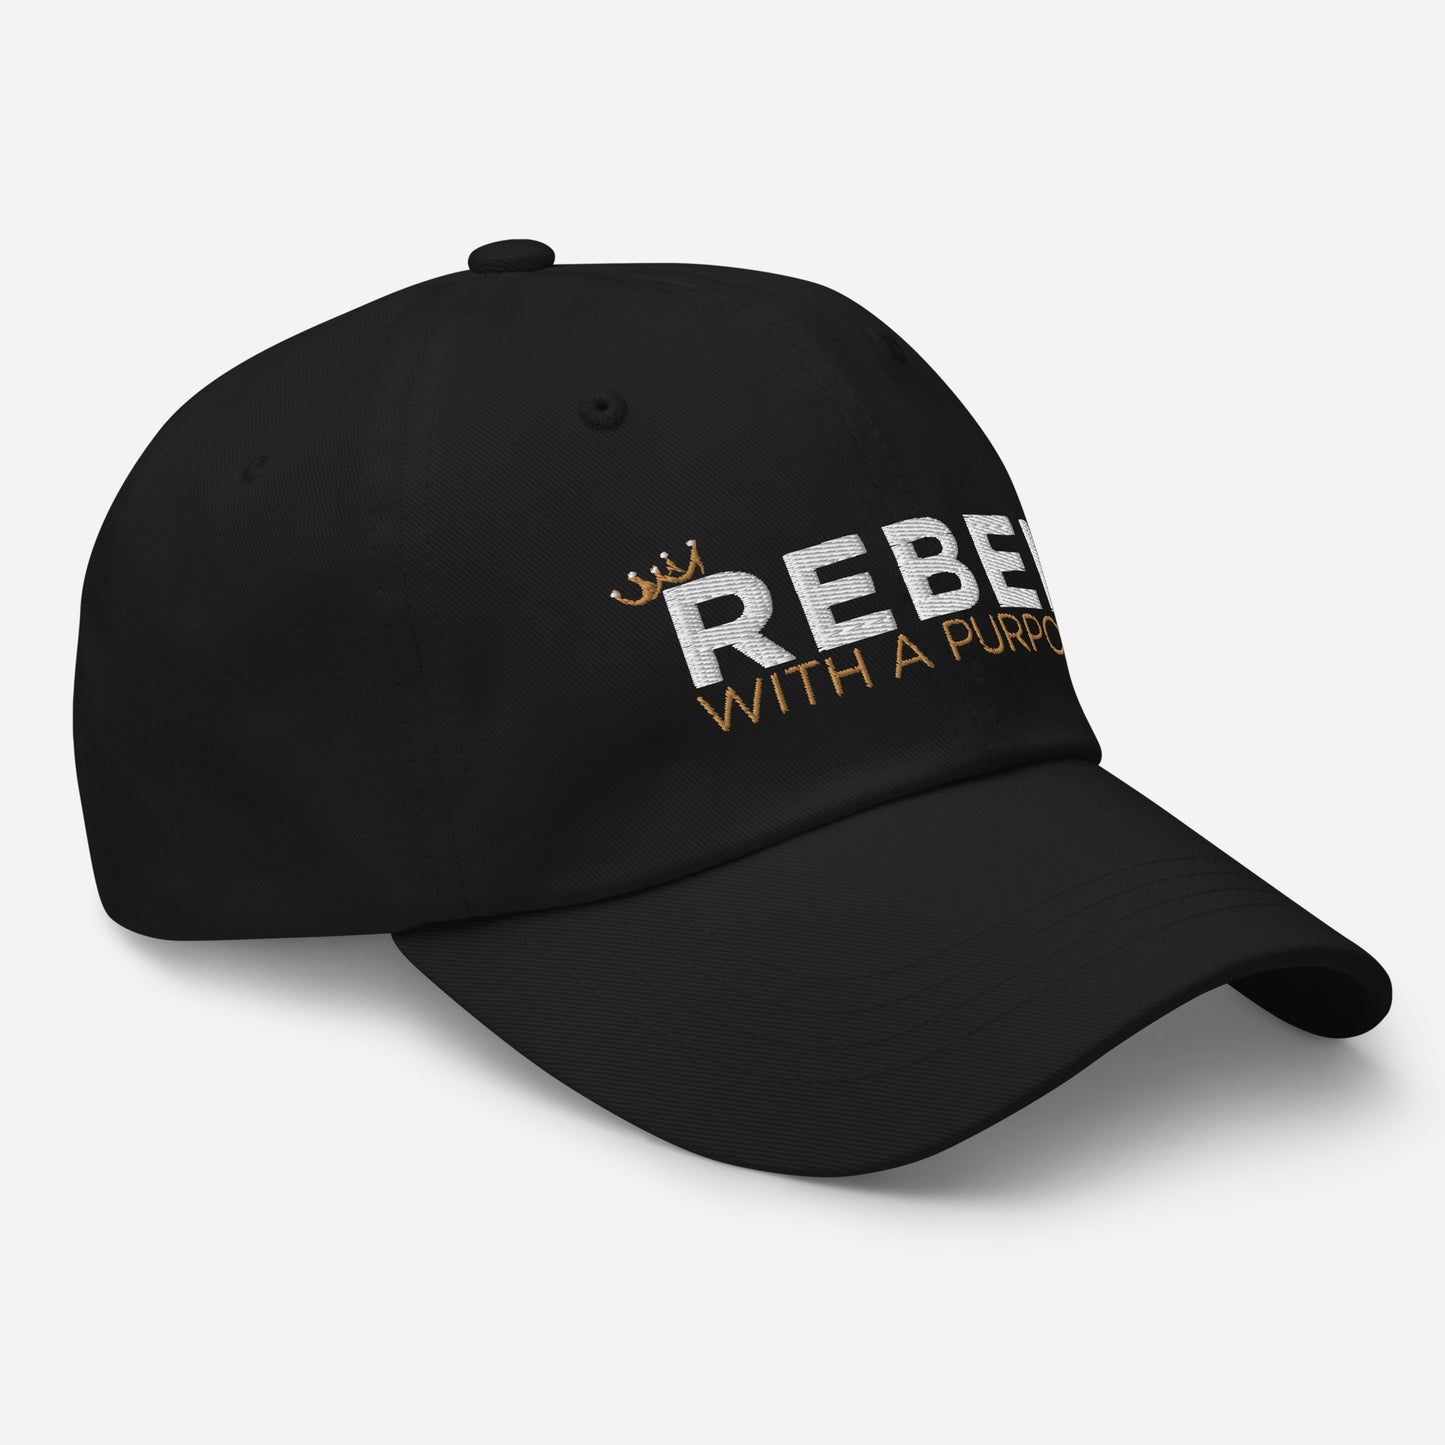 Rebel with a Purpose Dad hat